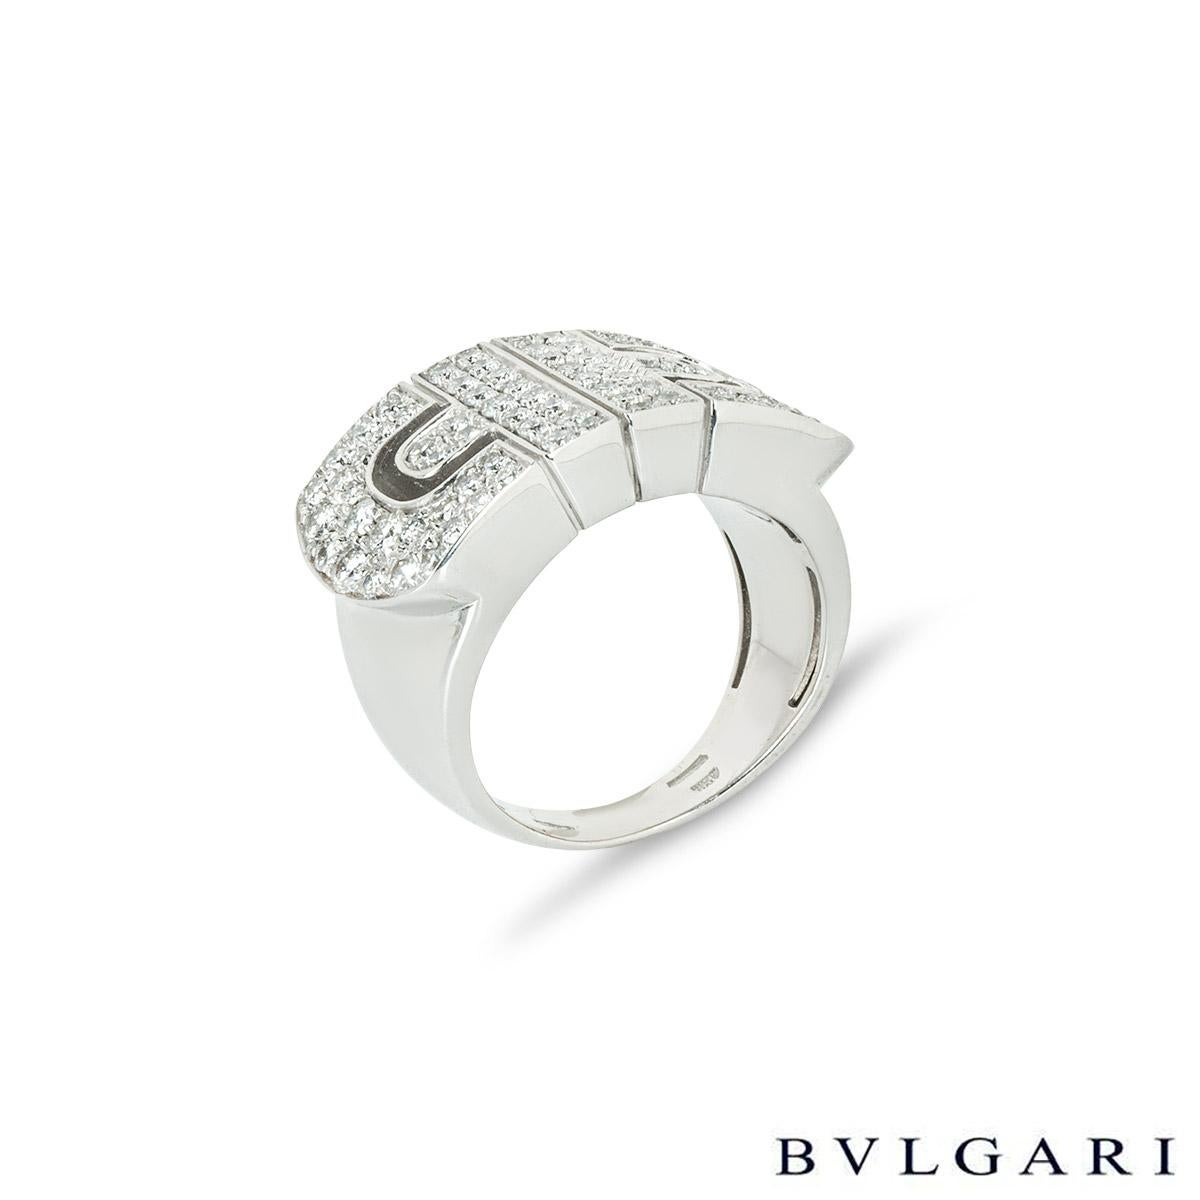 A lovely 18k white gold Parentesi Revolution ring by Bvlgari. The ring comprises of the Parentesi motif with round brilliant cut diamonds in a pave setting. The ring is set with 88 round brilliant cut diamonds totalling approximately 1.14ct, G